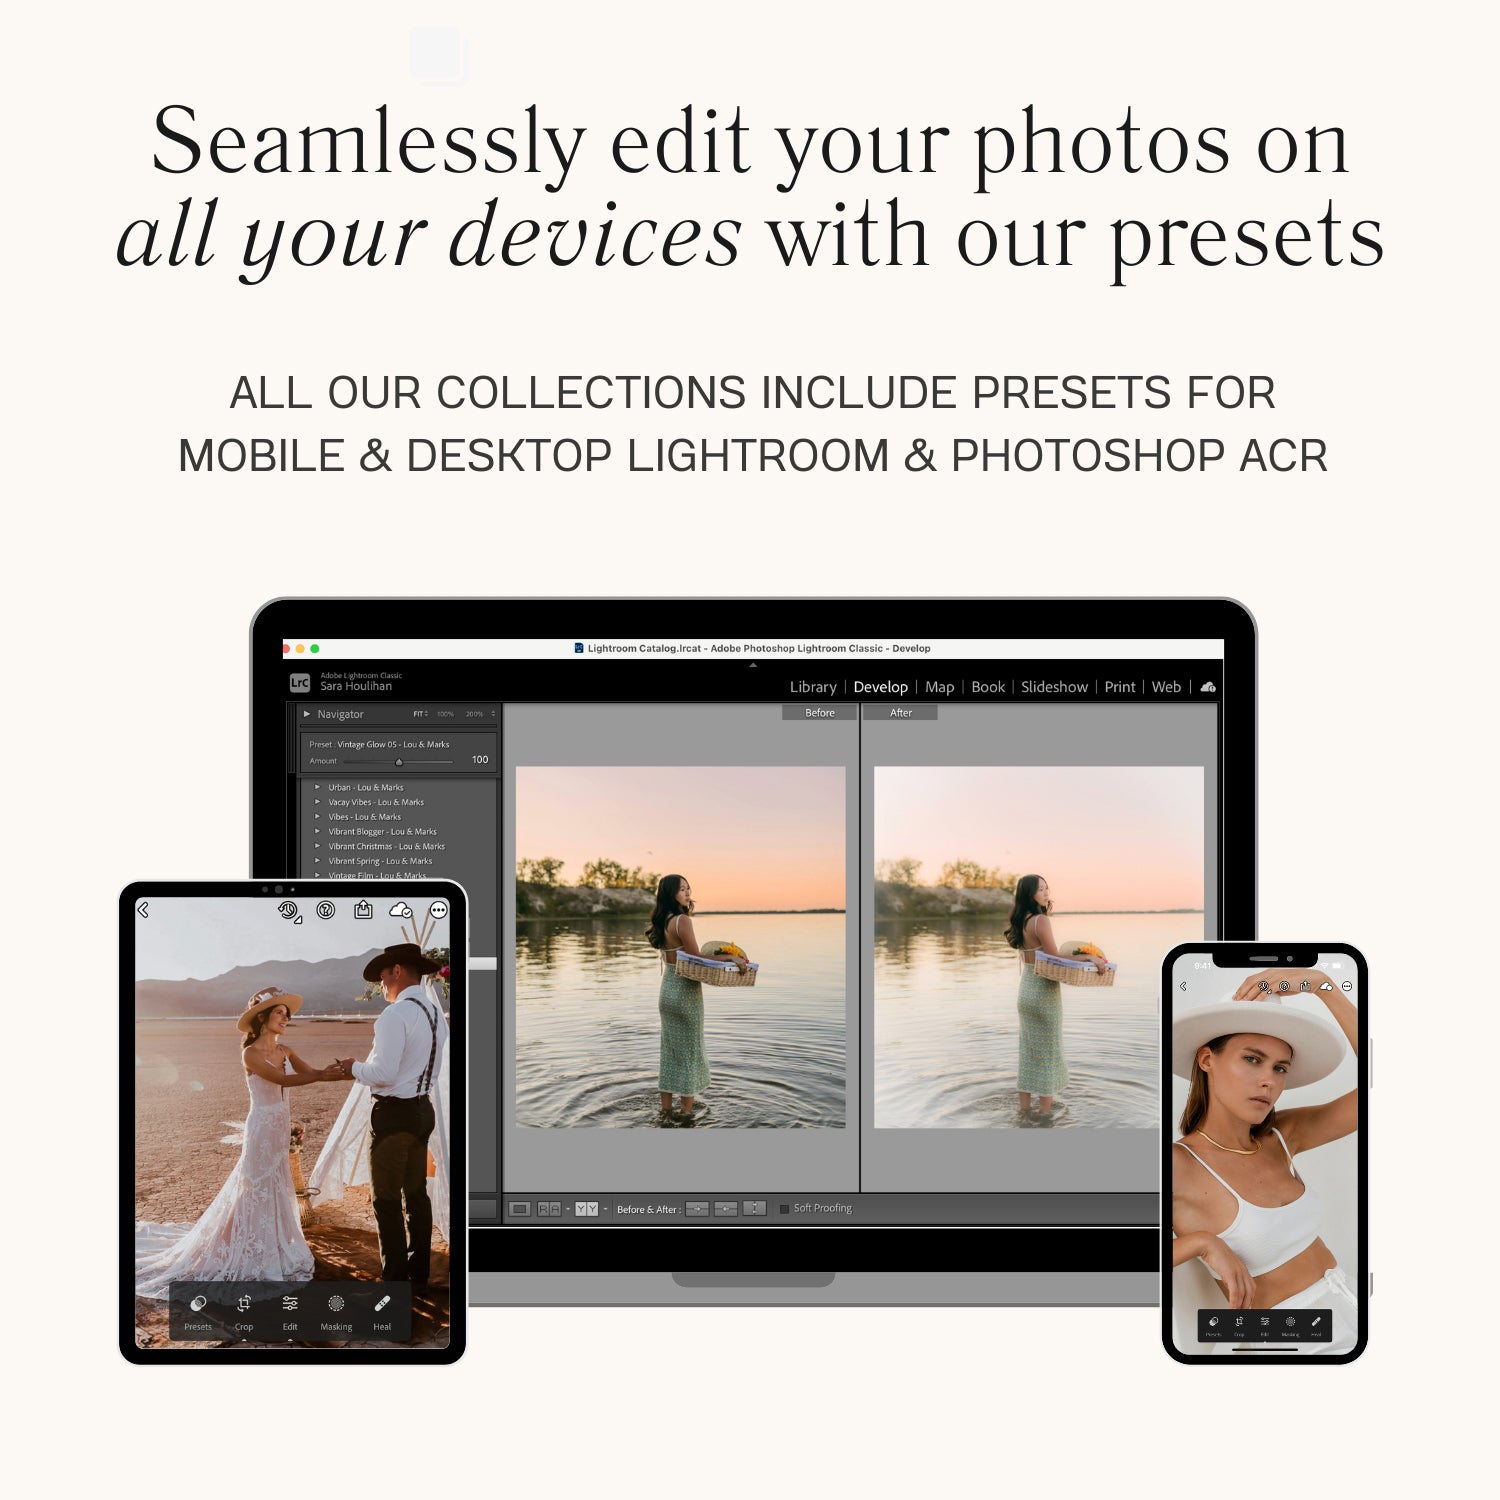 Best Analog Film Lightroom Presets The Best Photo Editing Preset Filters For Lightroom Mobile And Desktop For Photographers and Instagram Influencers By Lou And Marks Presets